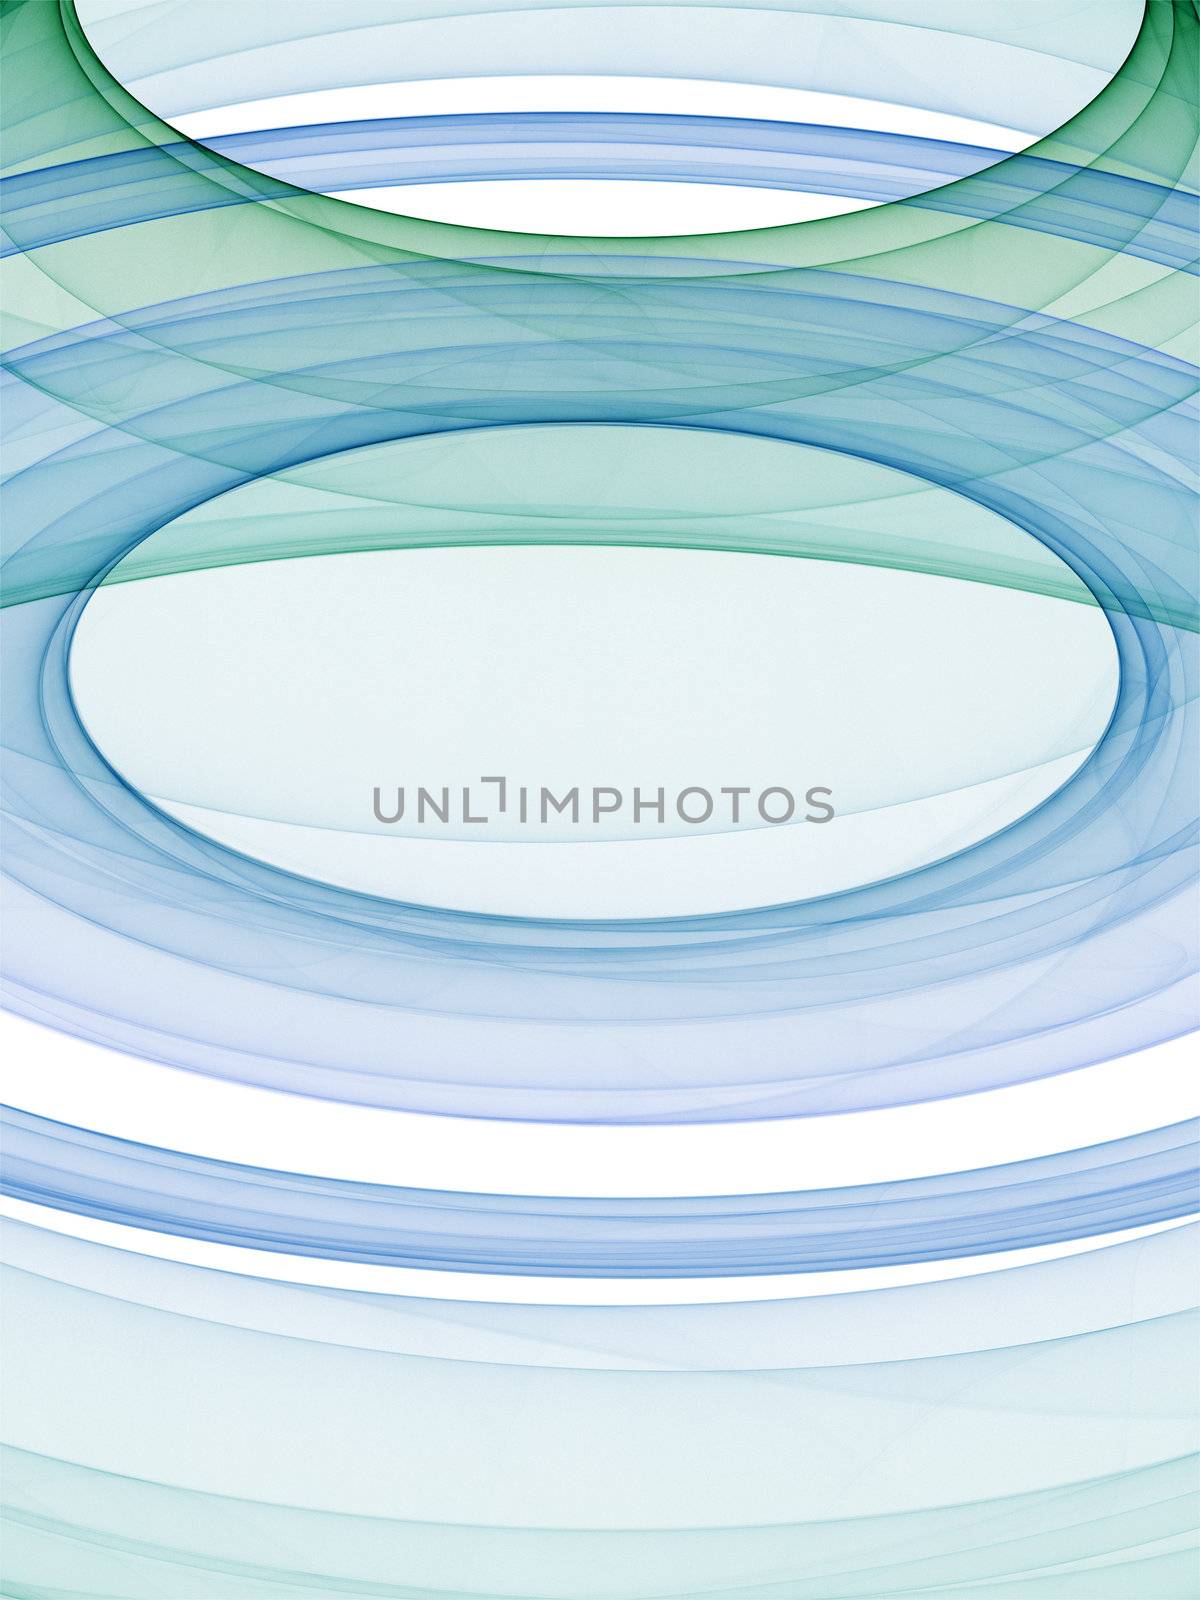 An illustration of a nice abstract green blue background